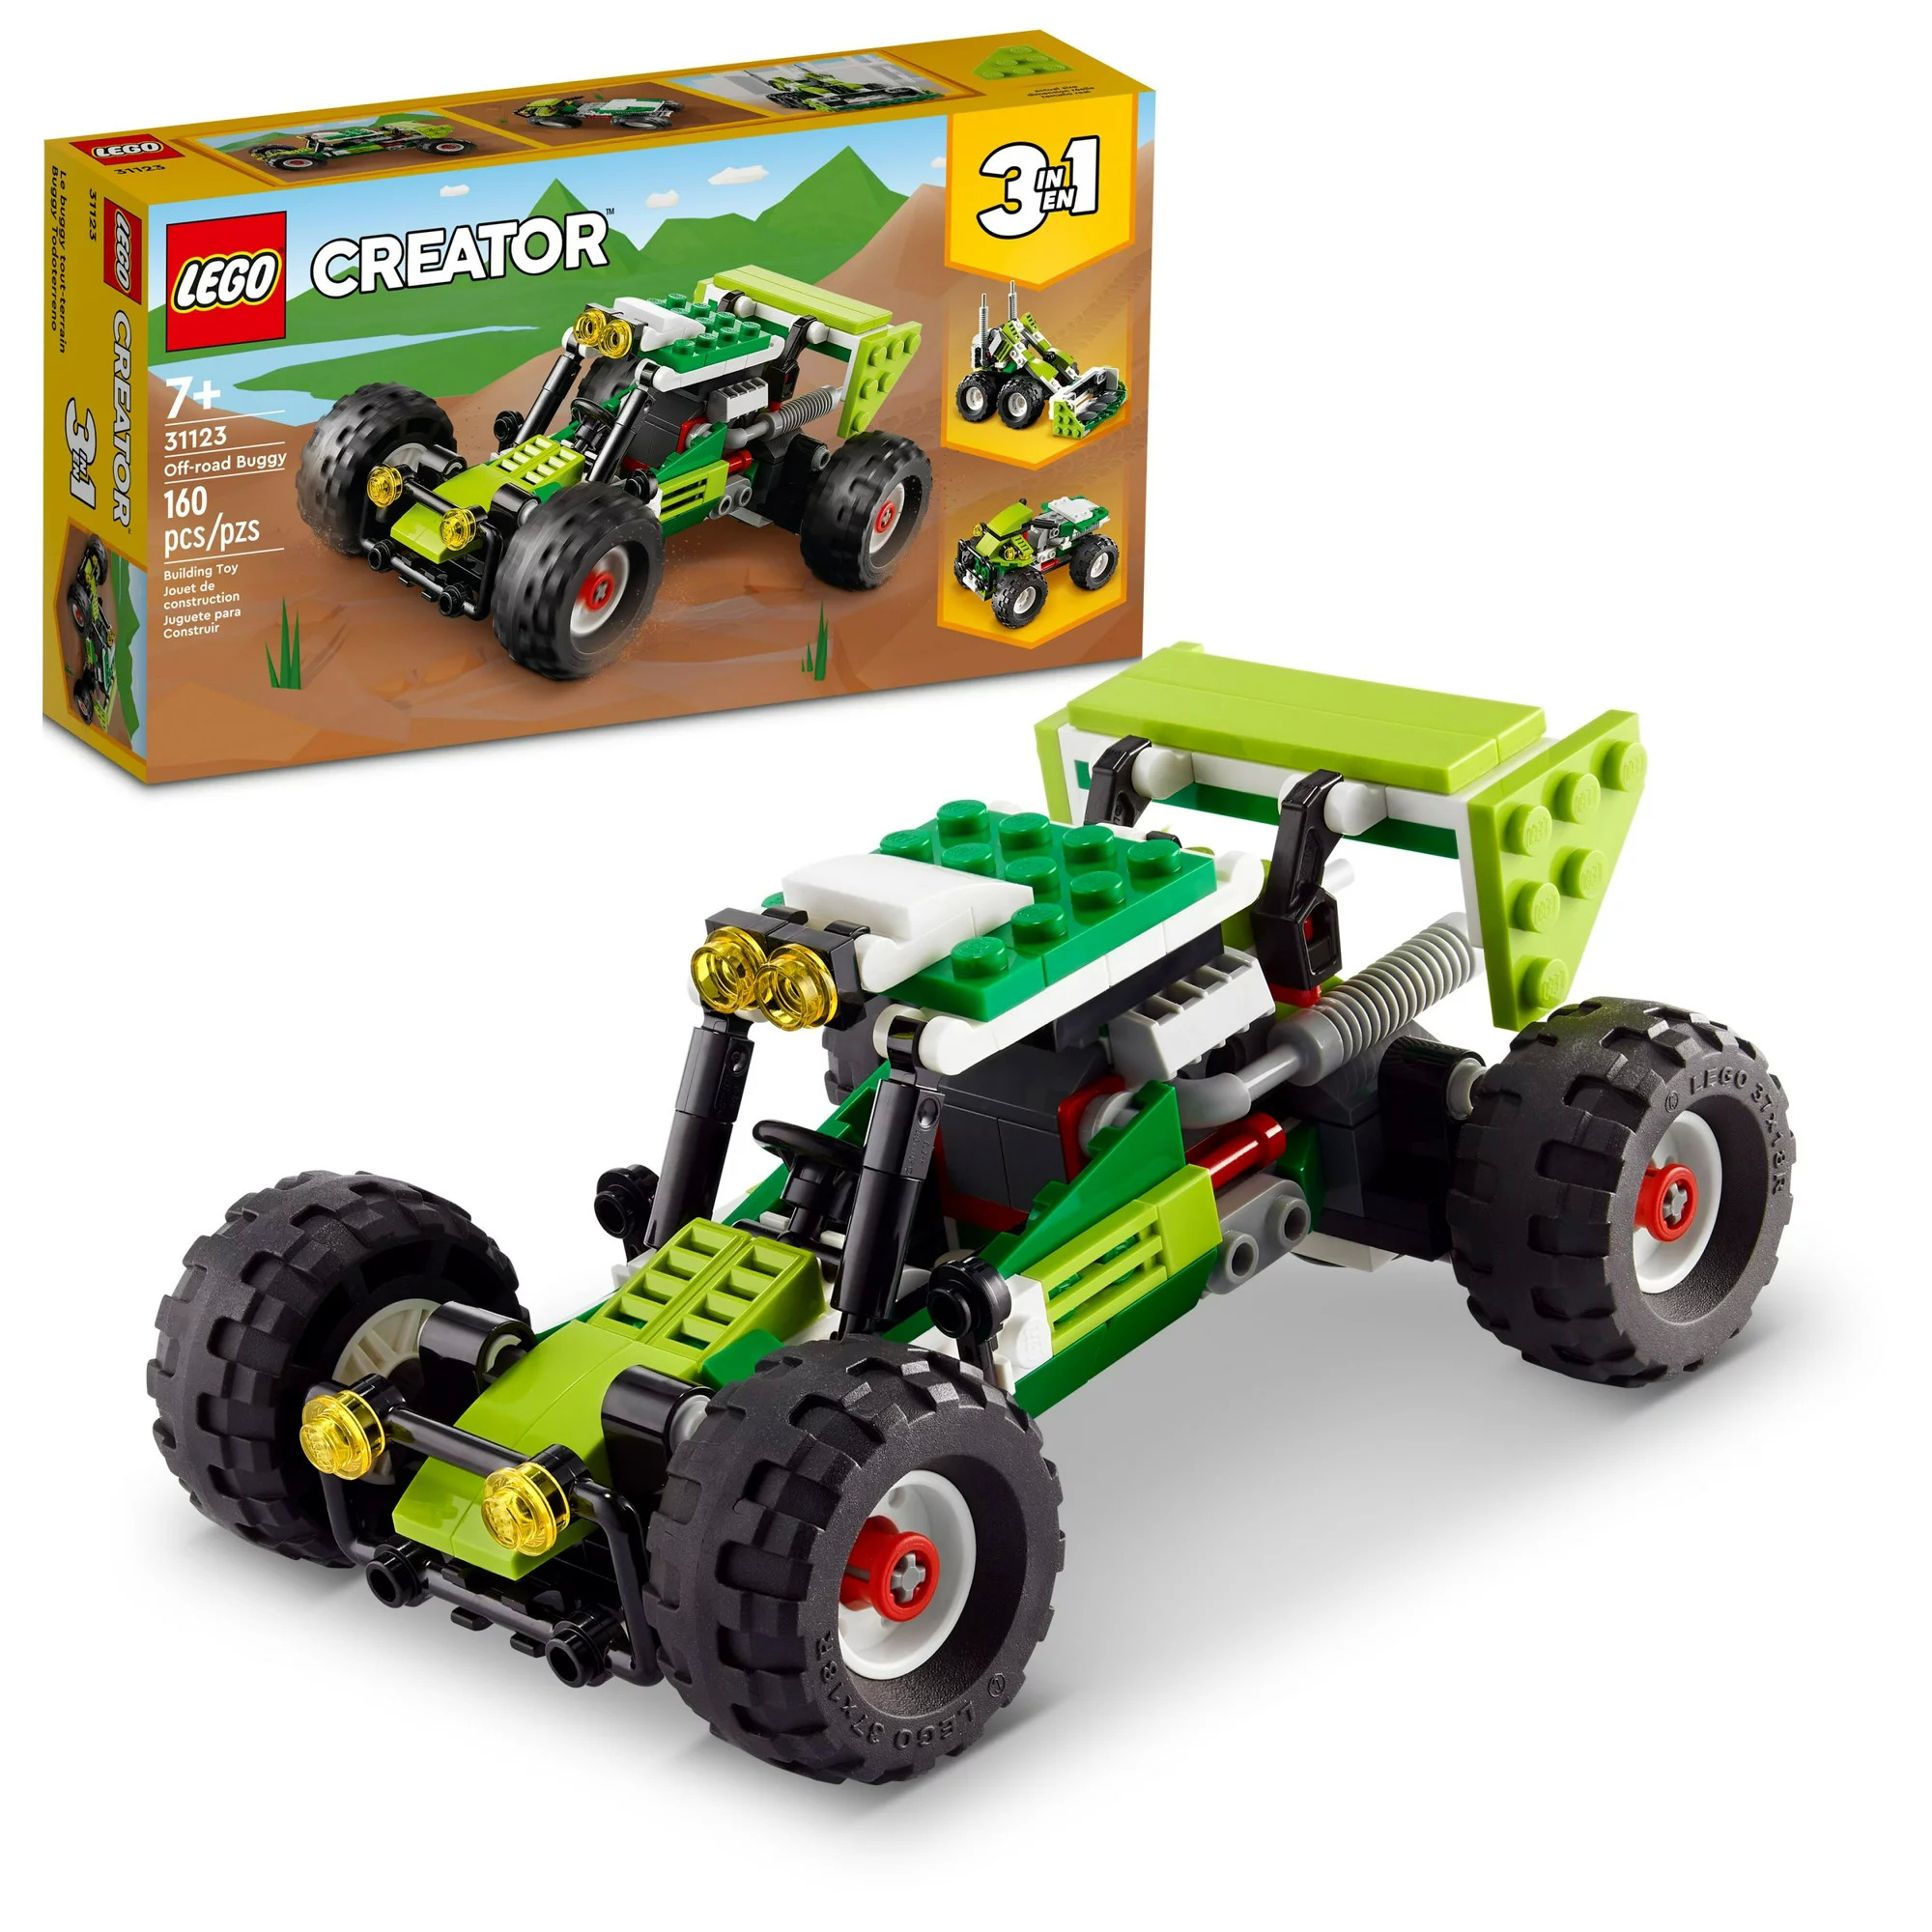 160-Piece Lego Creator 3-in-1 Off-road Buggy to Skid Loader Digger to ATV Car Construction Set (31123) $5 + Free S&H w/ Walmart+ or $35+ or Free Store Pickup at Walmart